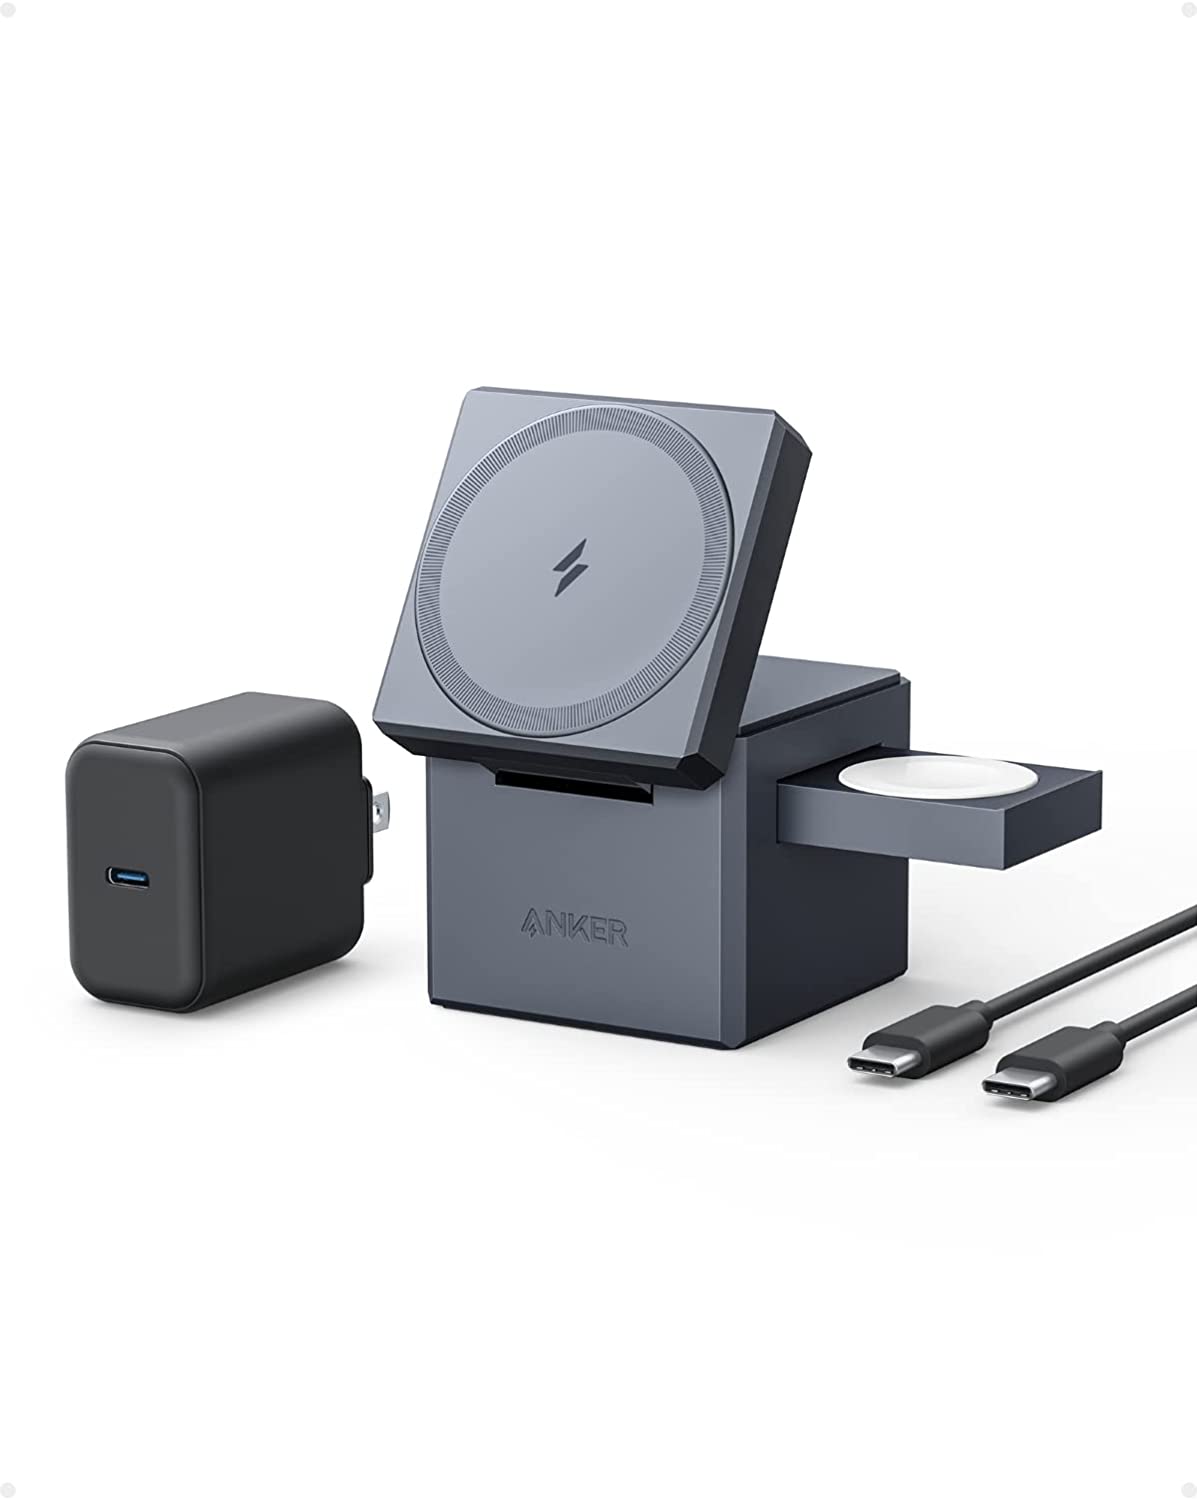 Anker 3-in-1 Cube with MagSafe (マグネット式 3-in-1 ワイヤレス充電ステーション)USB急速充電器付属 MFi認証